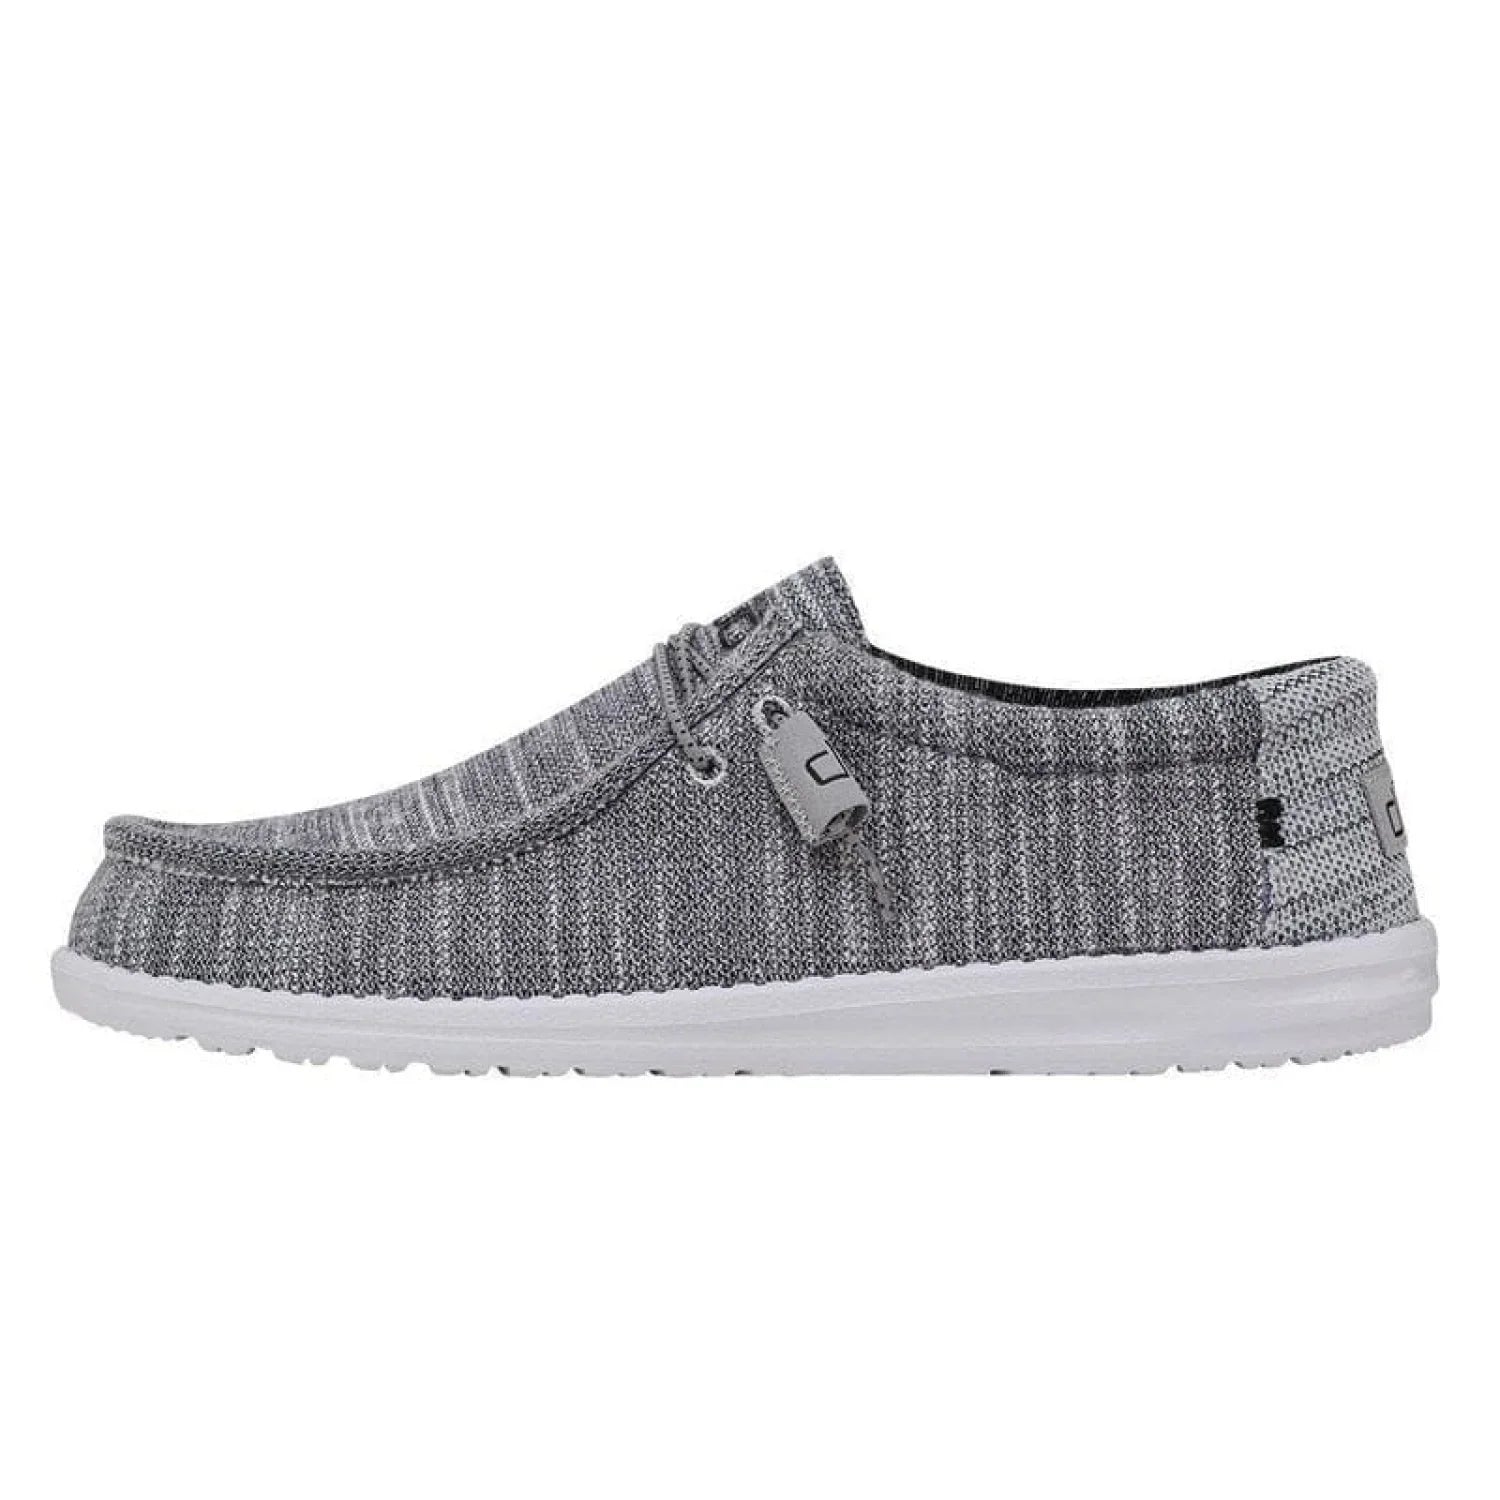 HEY DUDE 12. SHOES - MENS CASUAL SHOE Wally Stretch Mix GRANITE